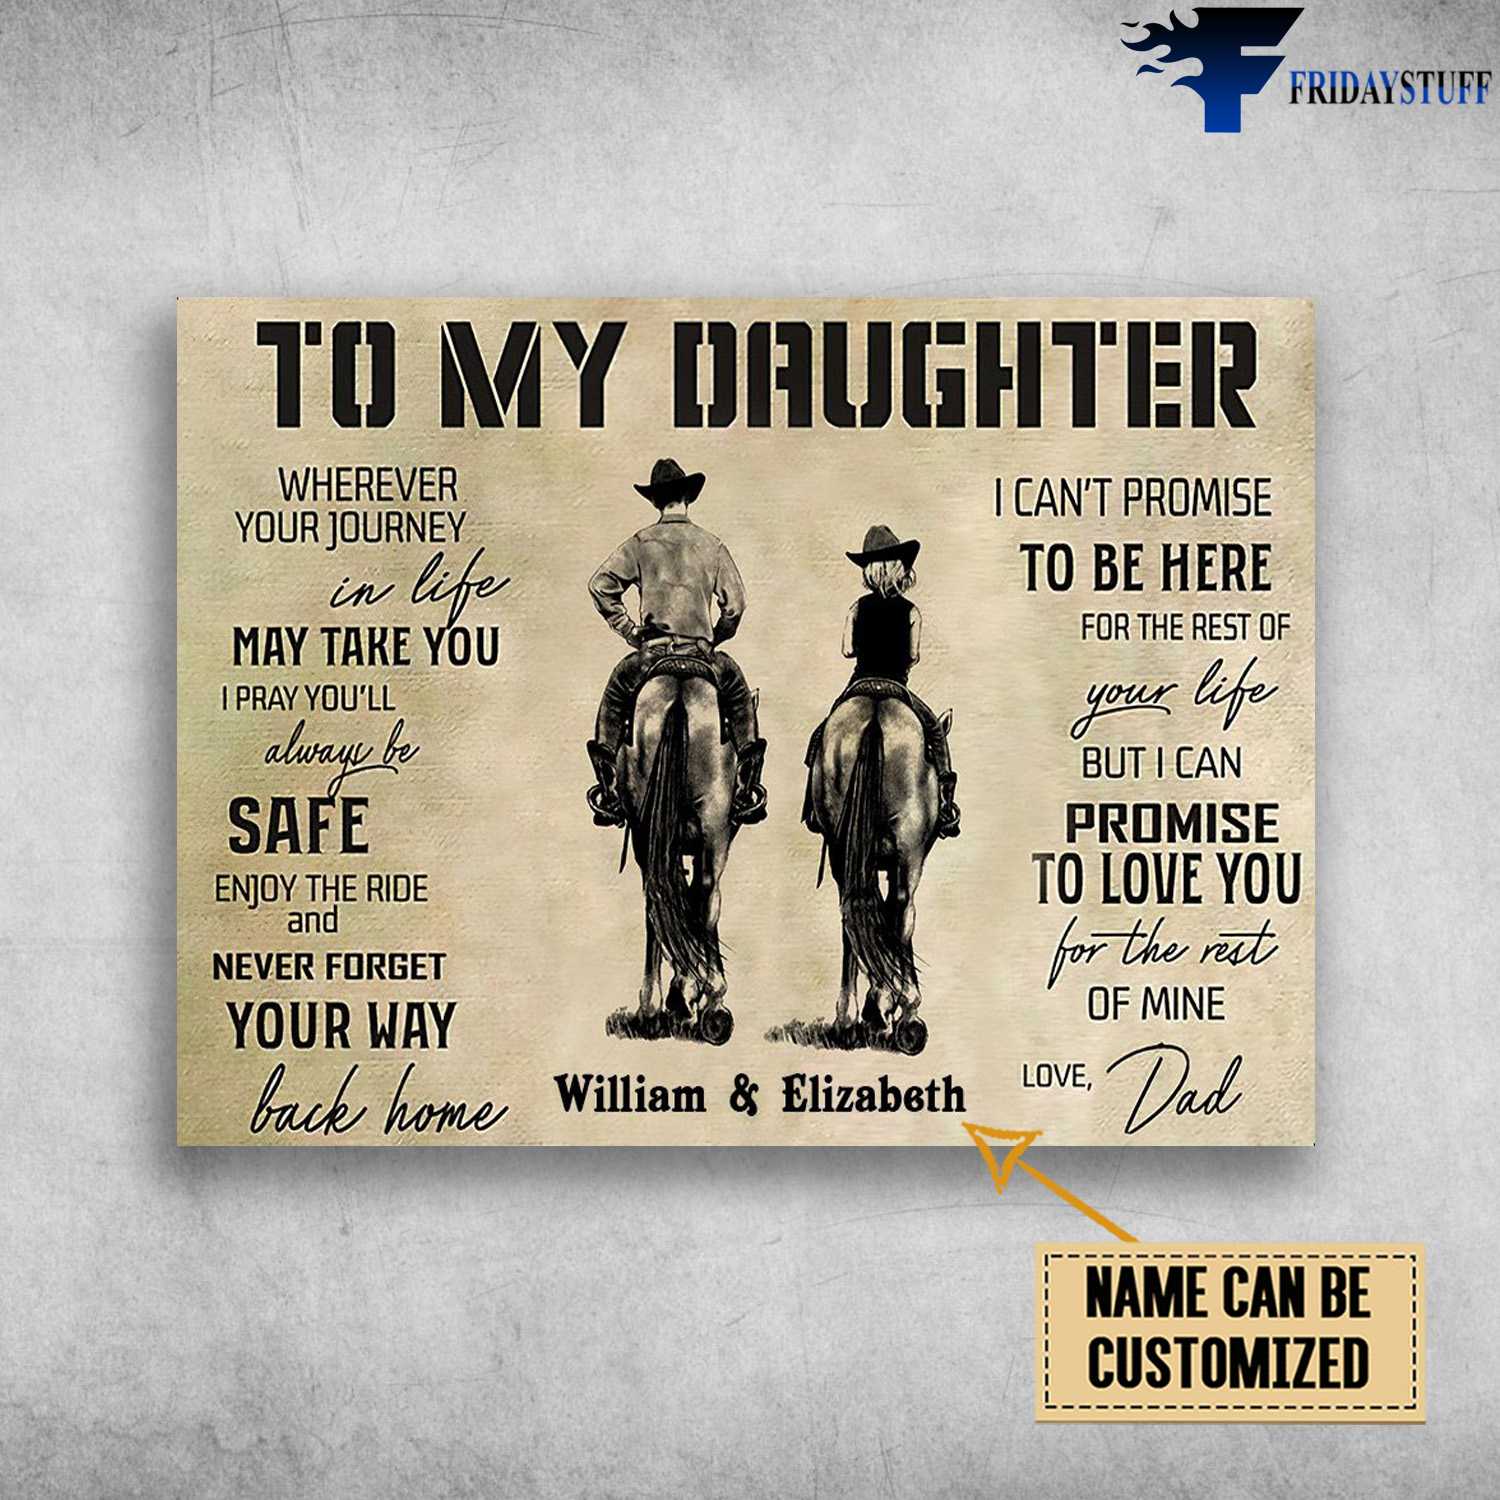 Dad And Daughter, Cowboy Poster, To My Daughter, Wherever Your Journey In Life, May Take You, I Pray You'll Always Be Safe